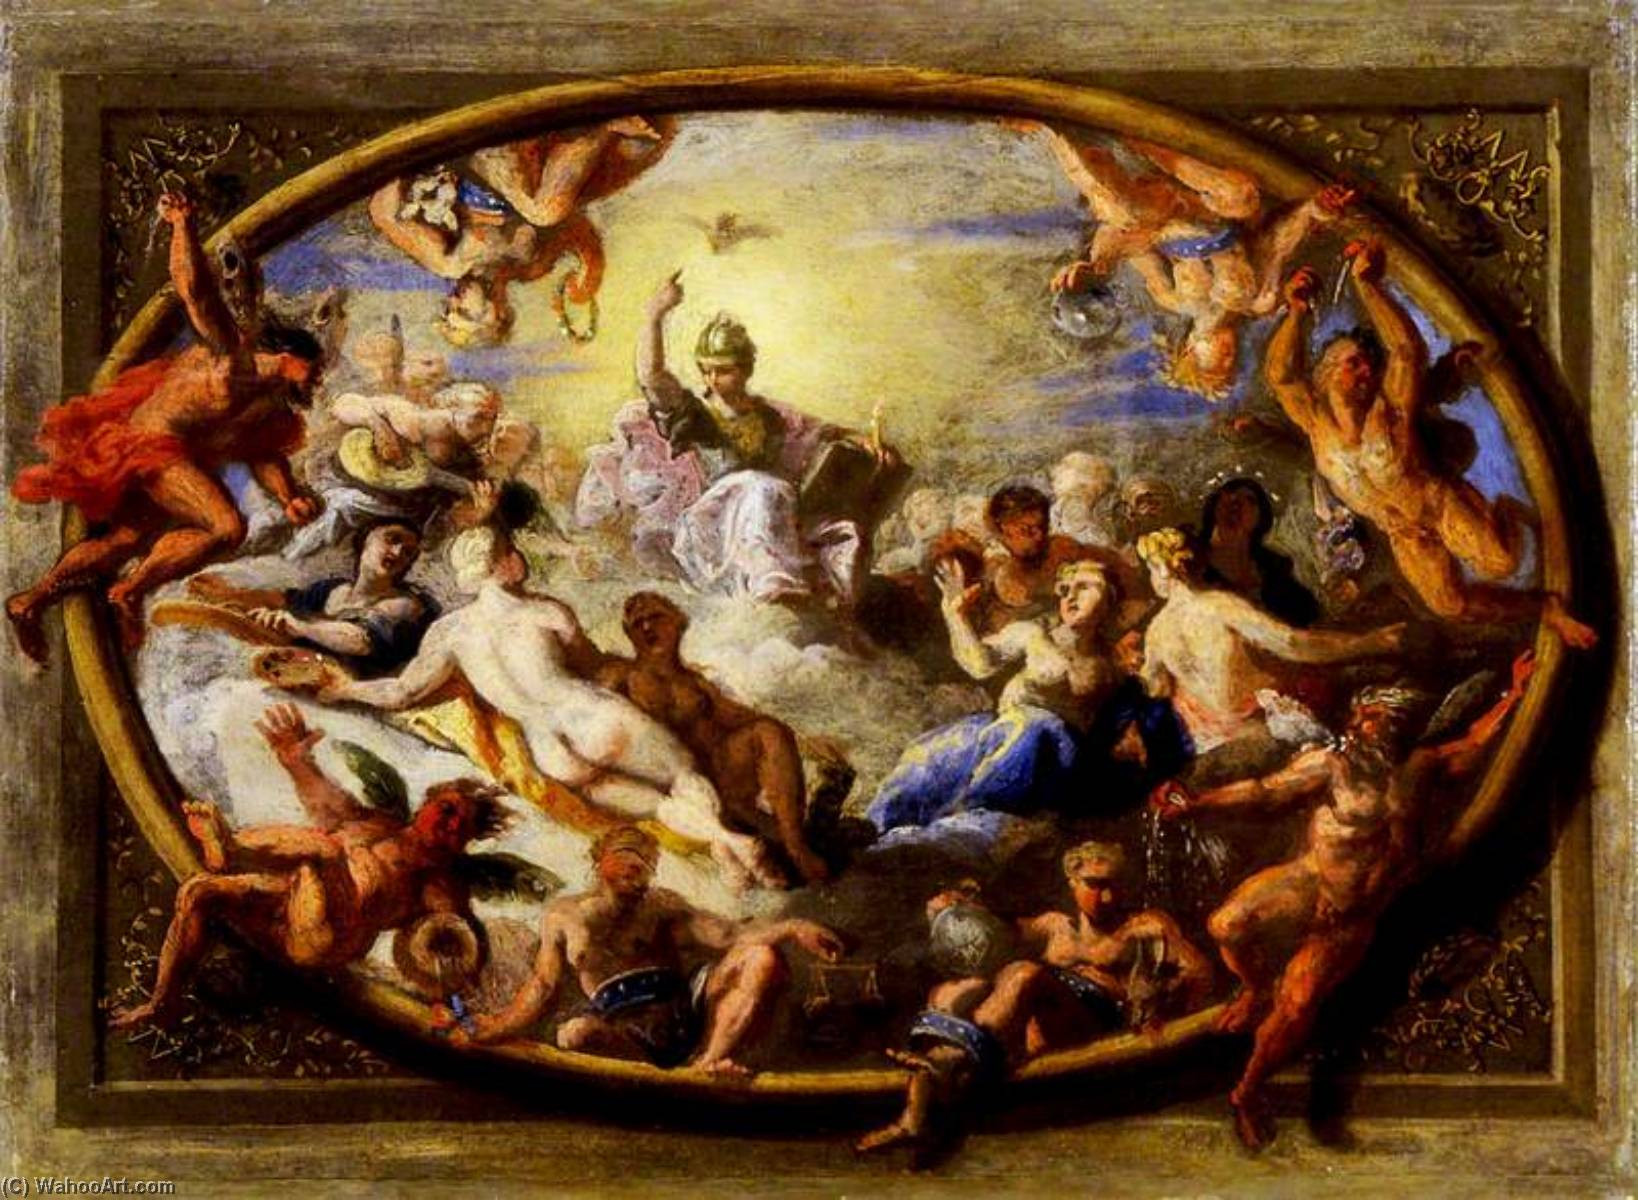 WikiOO.org - Güzel Sanatlar Ansiklopedisi - Resim, Resimler Antonio Verrio - Minerva with Allegorical Figures of the Arts and Sciences (sketch for the ceiling of the Banqueting House, Hampton Court Palace)